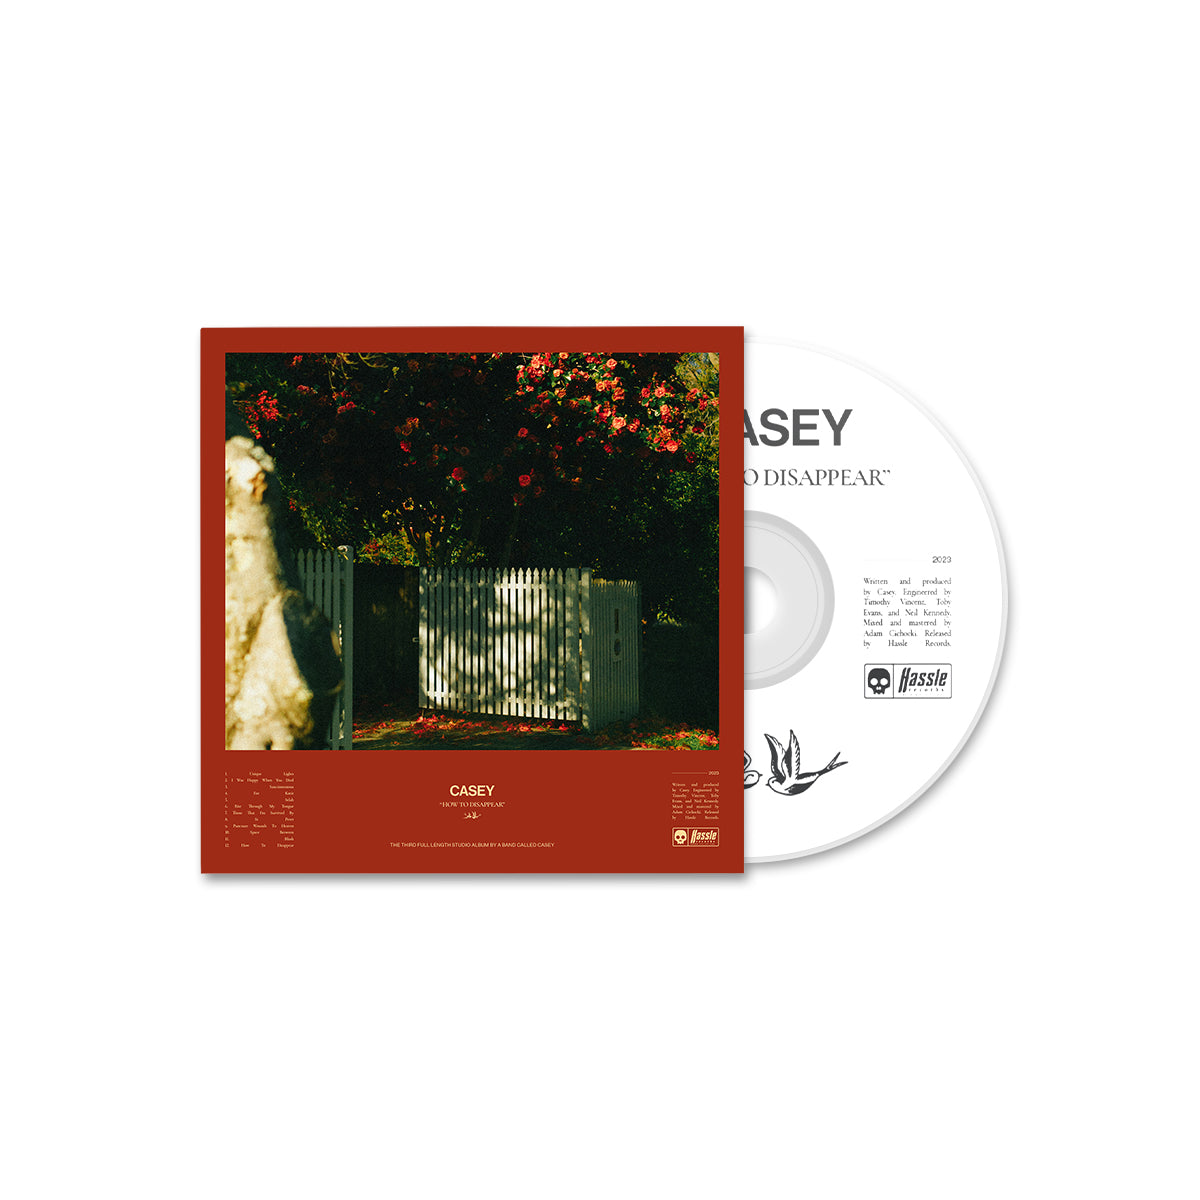 CASEY "How To Disappear" CD